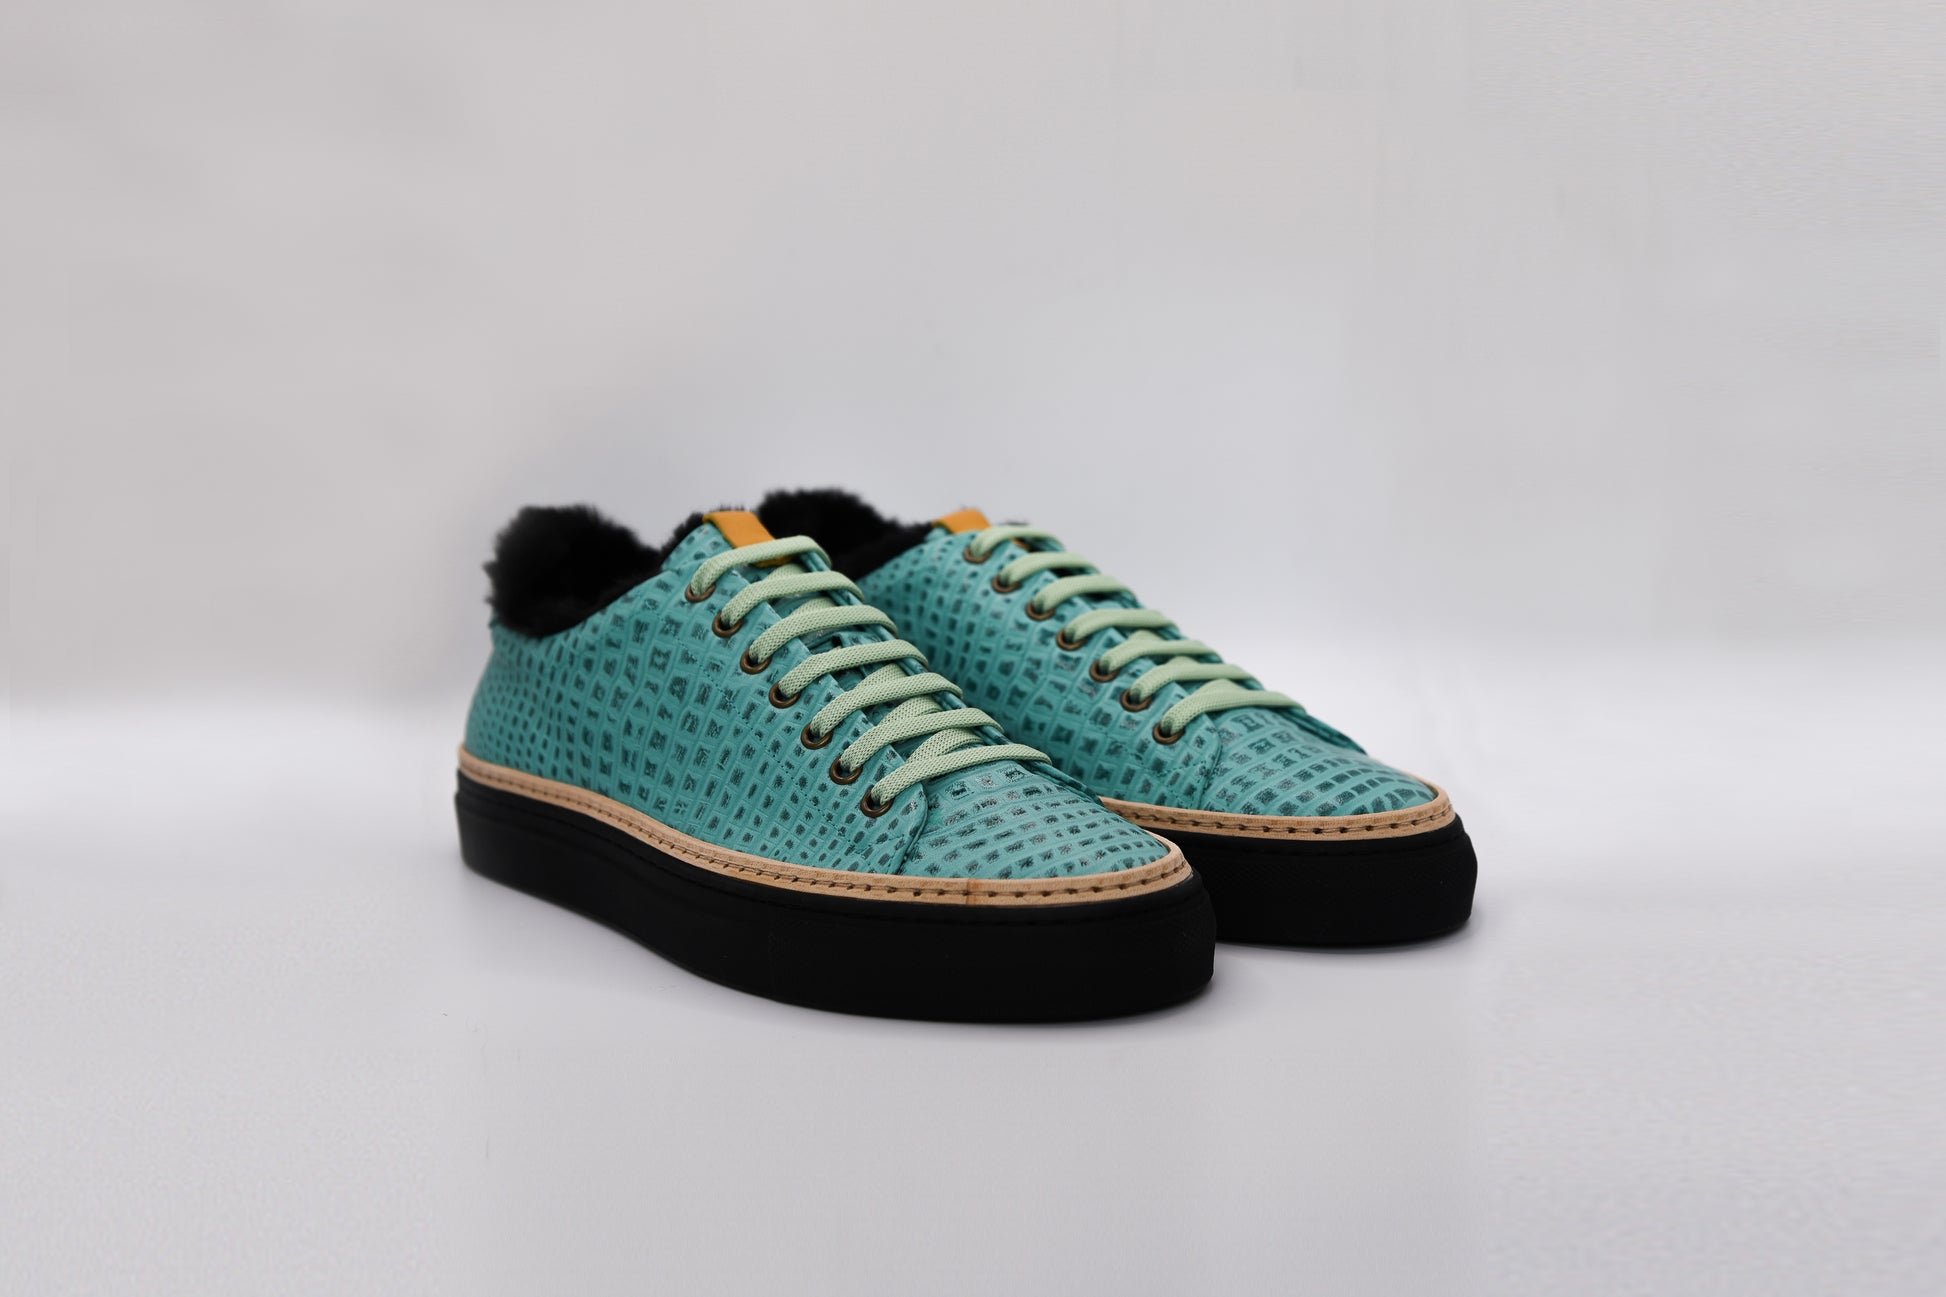 Men’s Mint Leather Sneakers with Black Eco-Fur